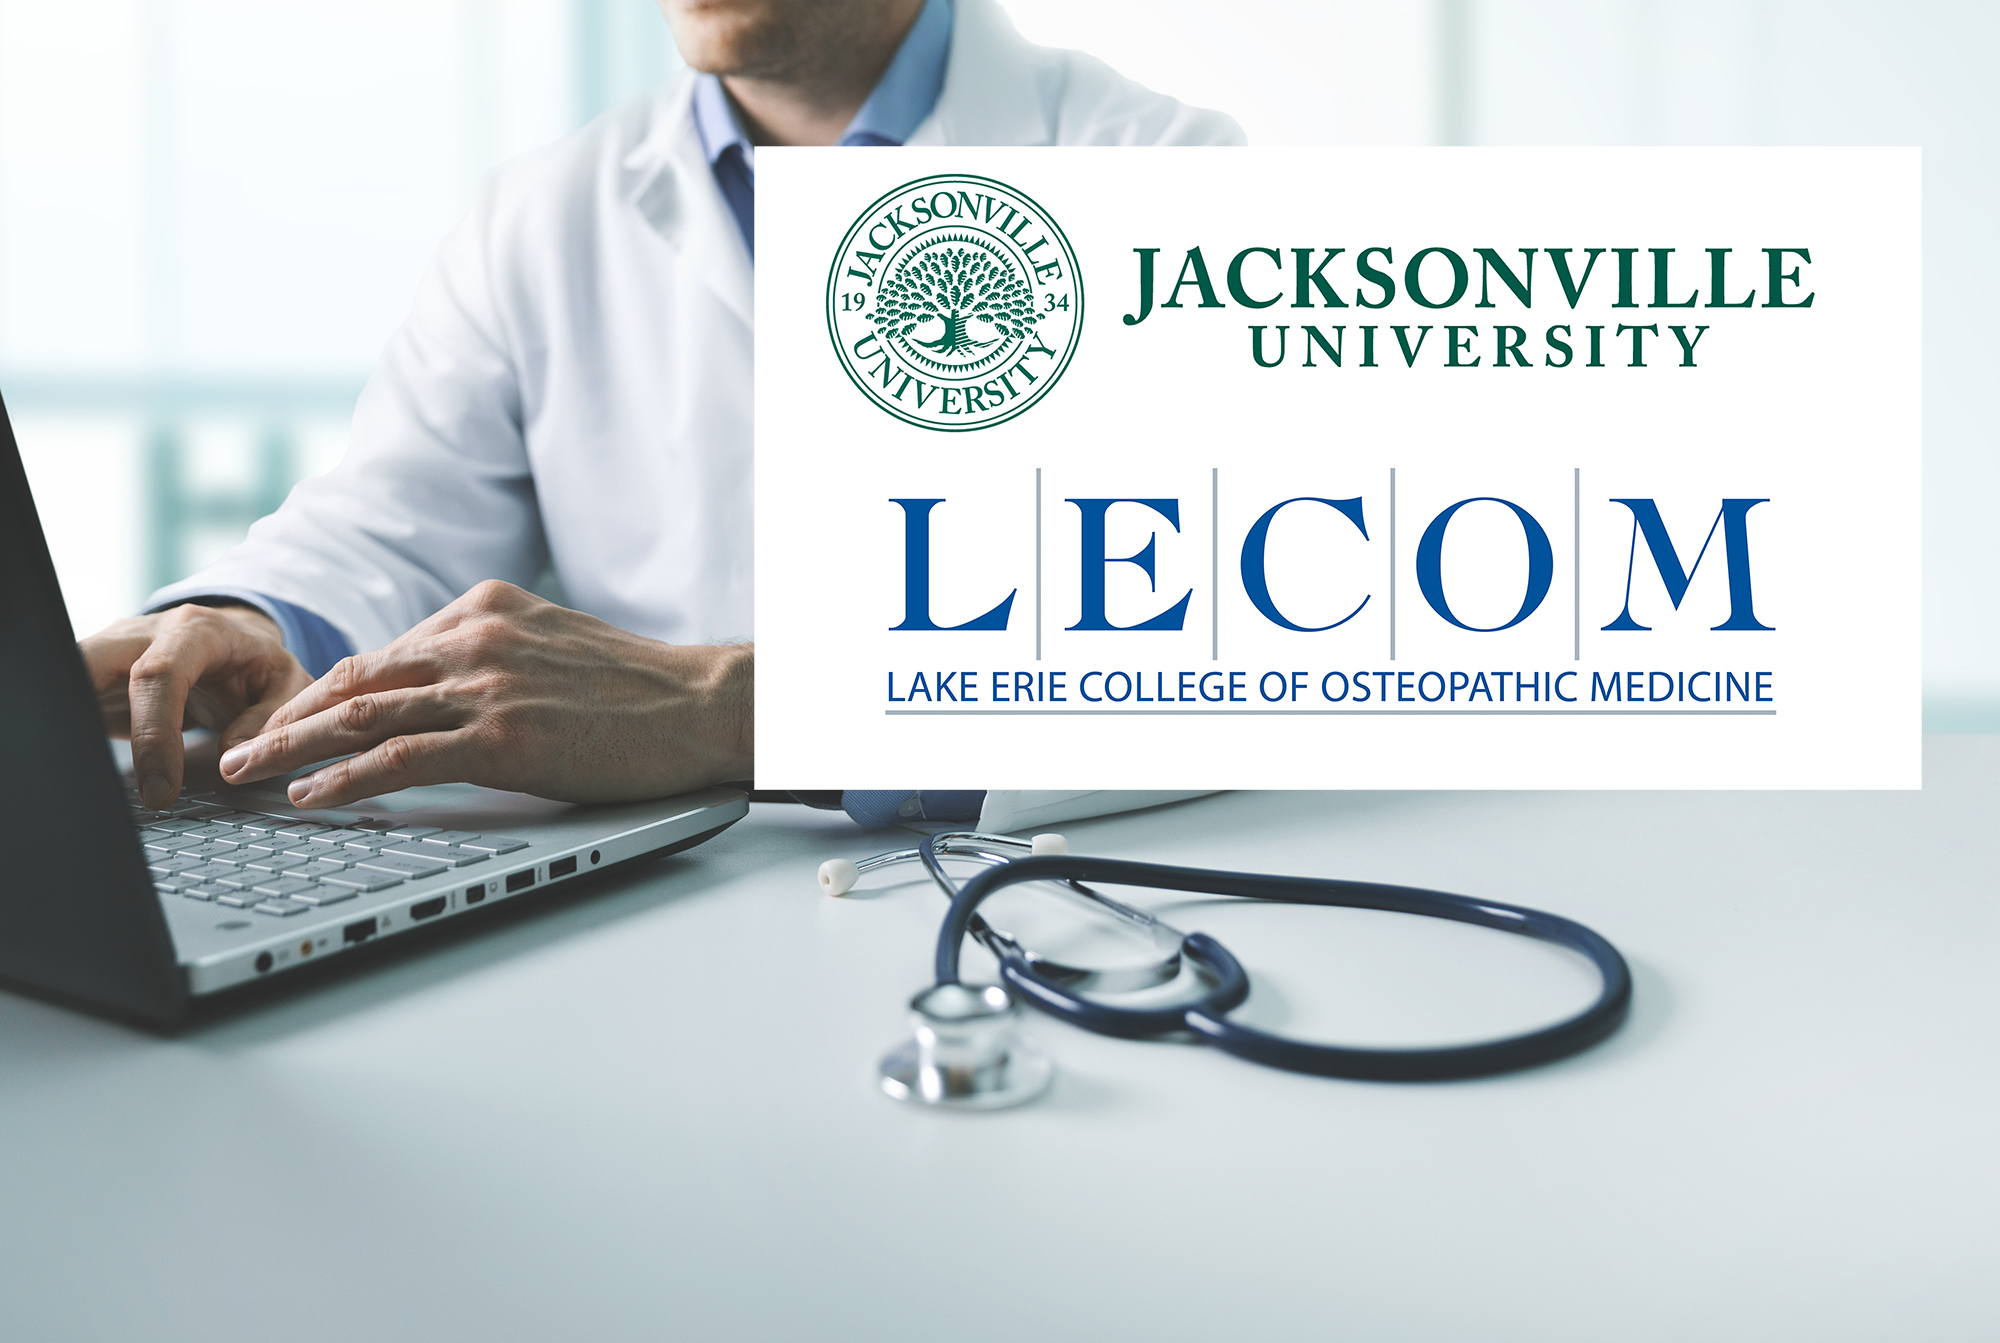 LECOM was founded as the 16th college of osteopathic medicine in the U.S. in 1992 in Erie, Pennsylvania, with its charter class in 1993.